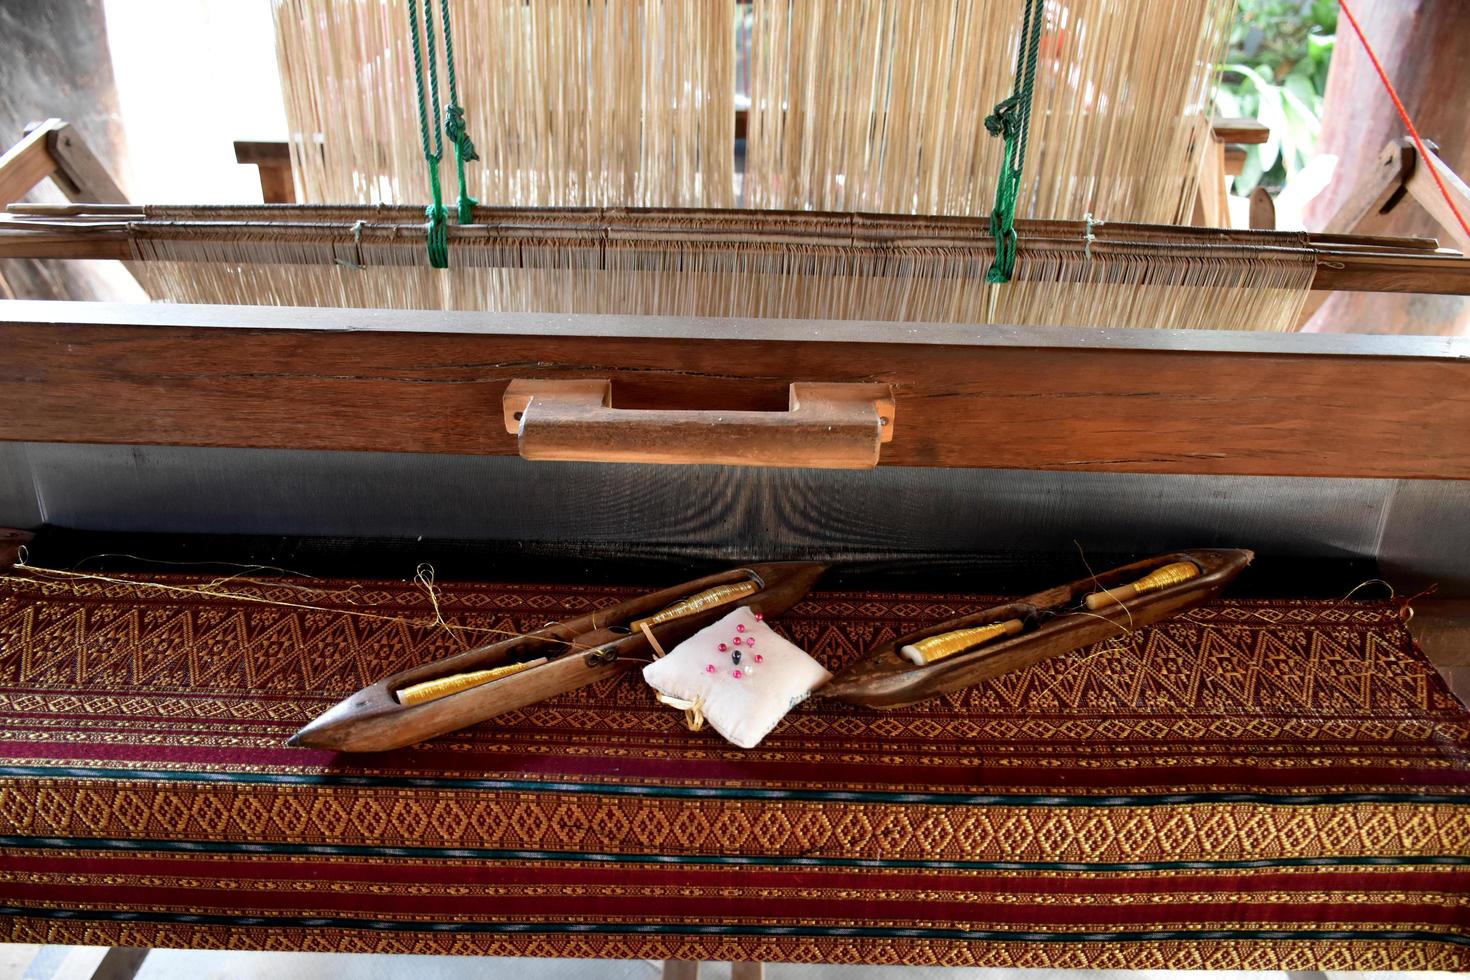 Weaving loom at home of asian people, they do the weaving with this loom at home after harvesting season. photo